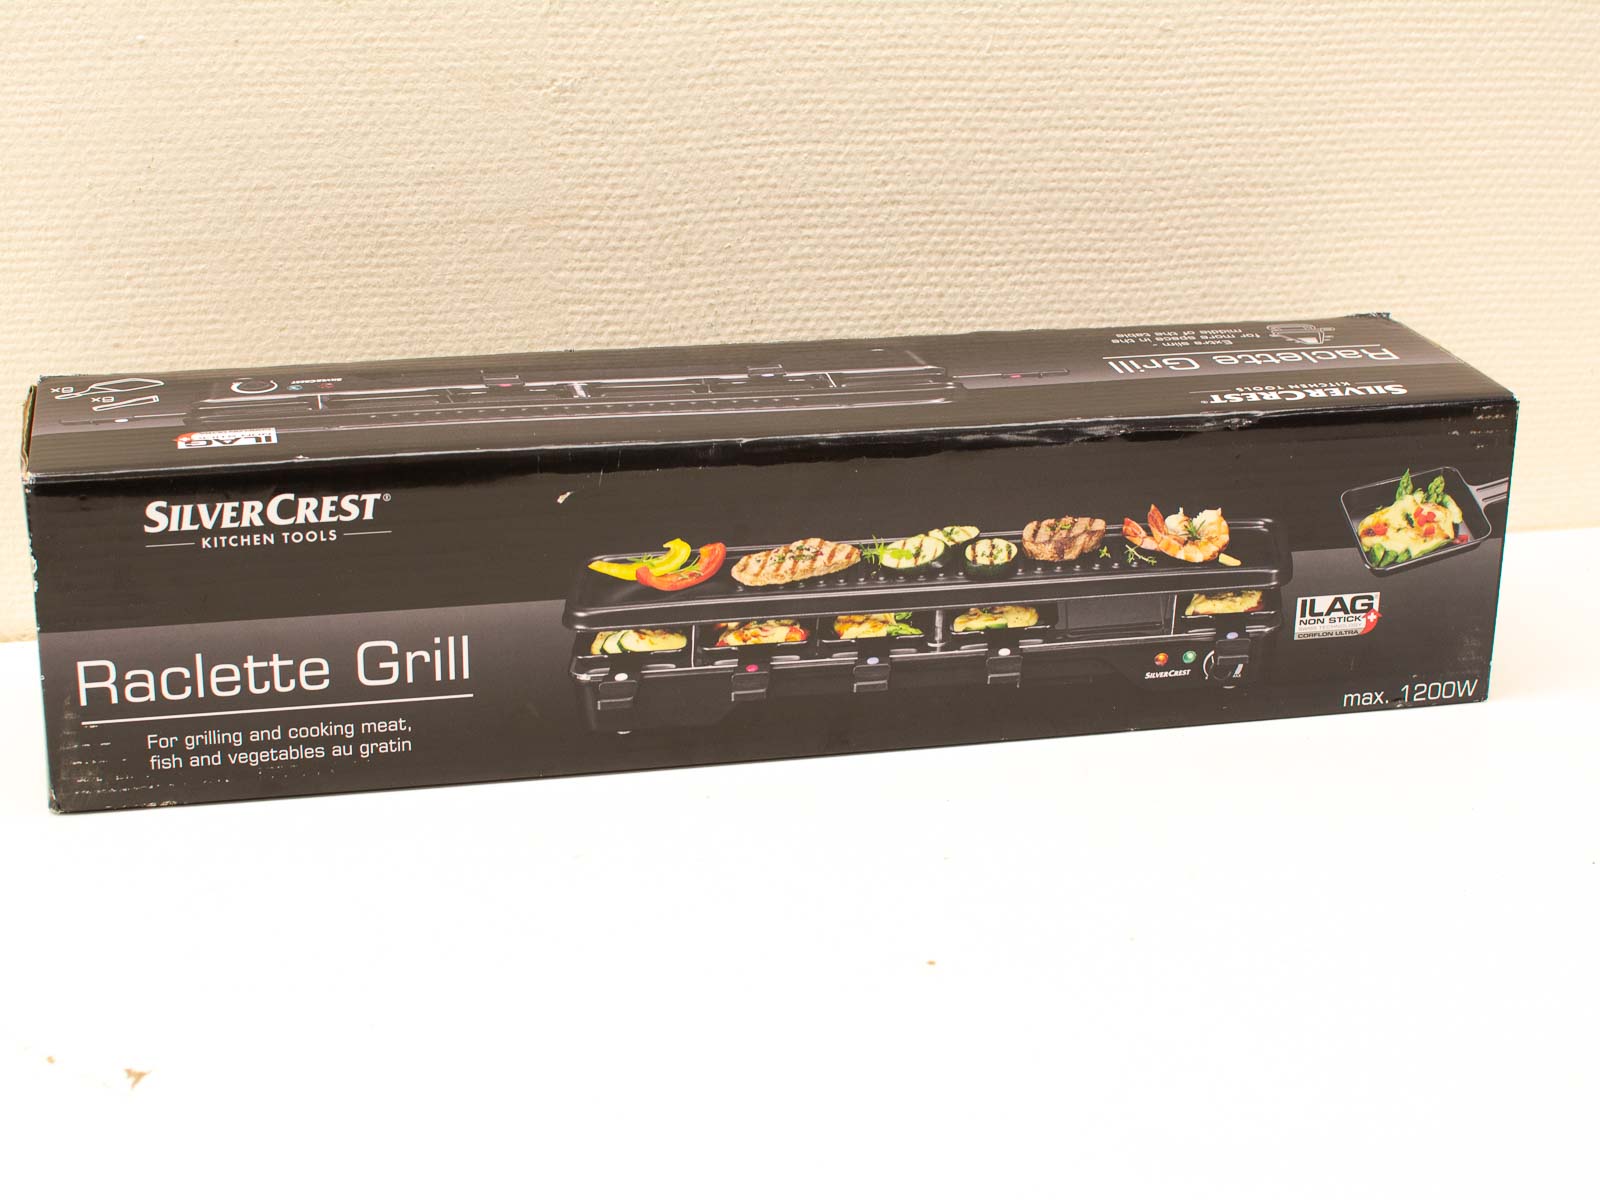 Raclette grill 30726